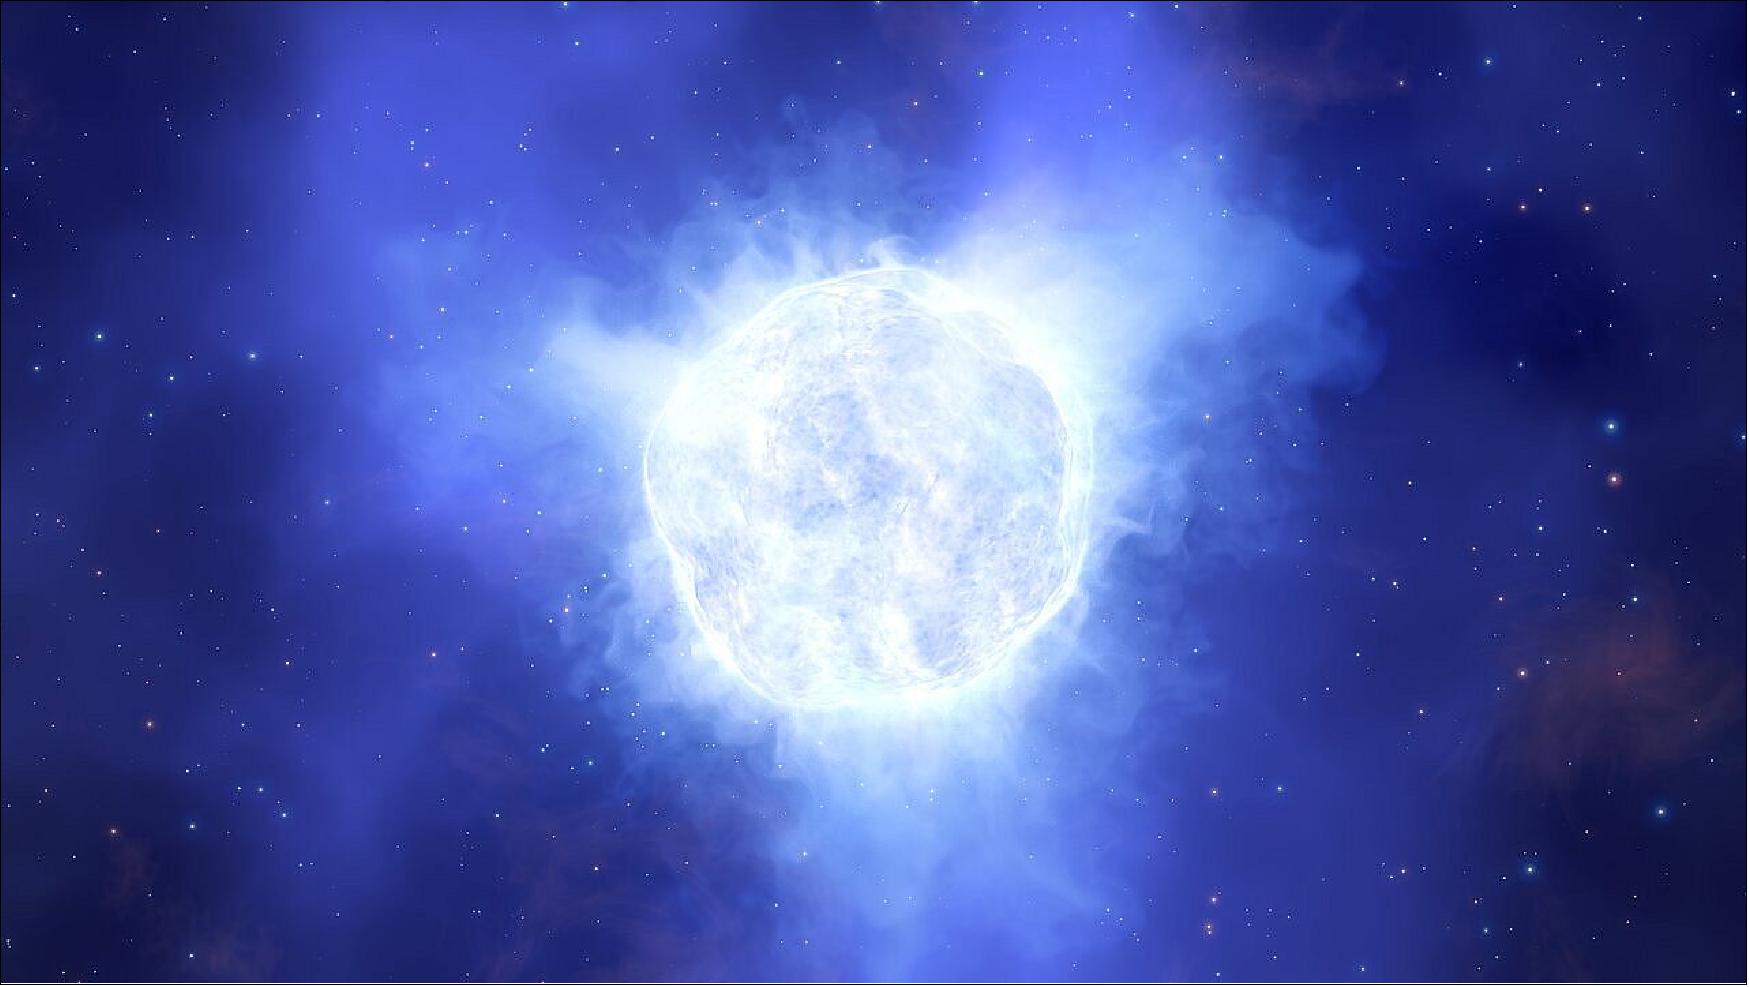 Figure 34: Artist’s impression of the disappearing star. This illustration shows what the luminous blue variable star in the Kinman Dwarf galaxy could have looked like before its mysterious disappearance (image credit: ESO/L. Calçada)